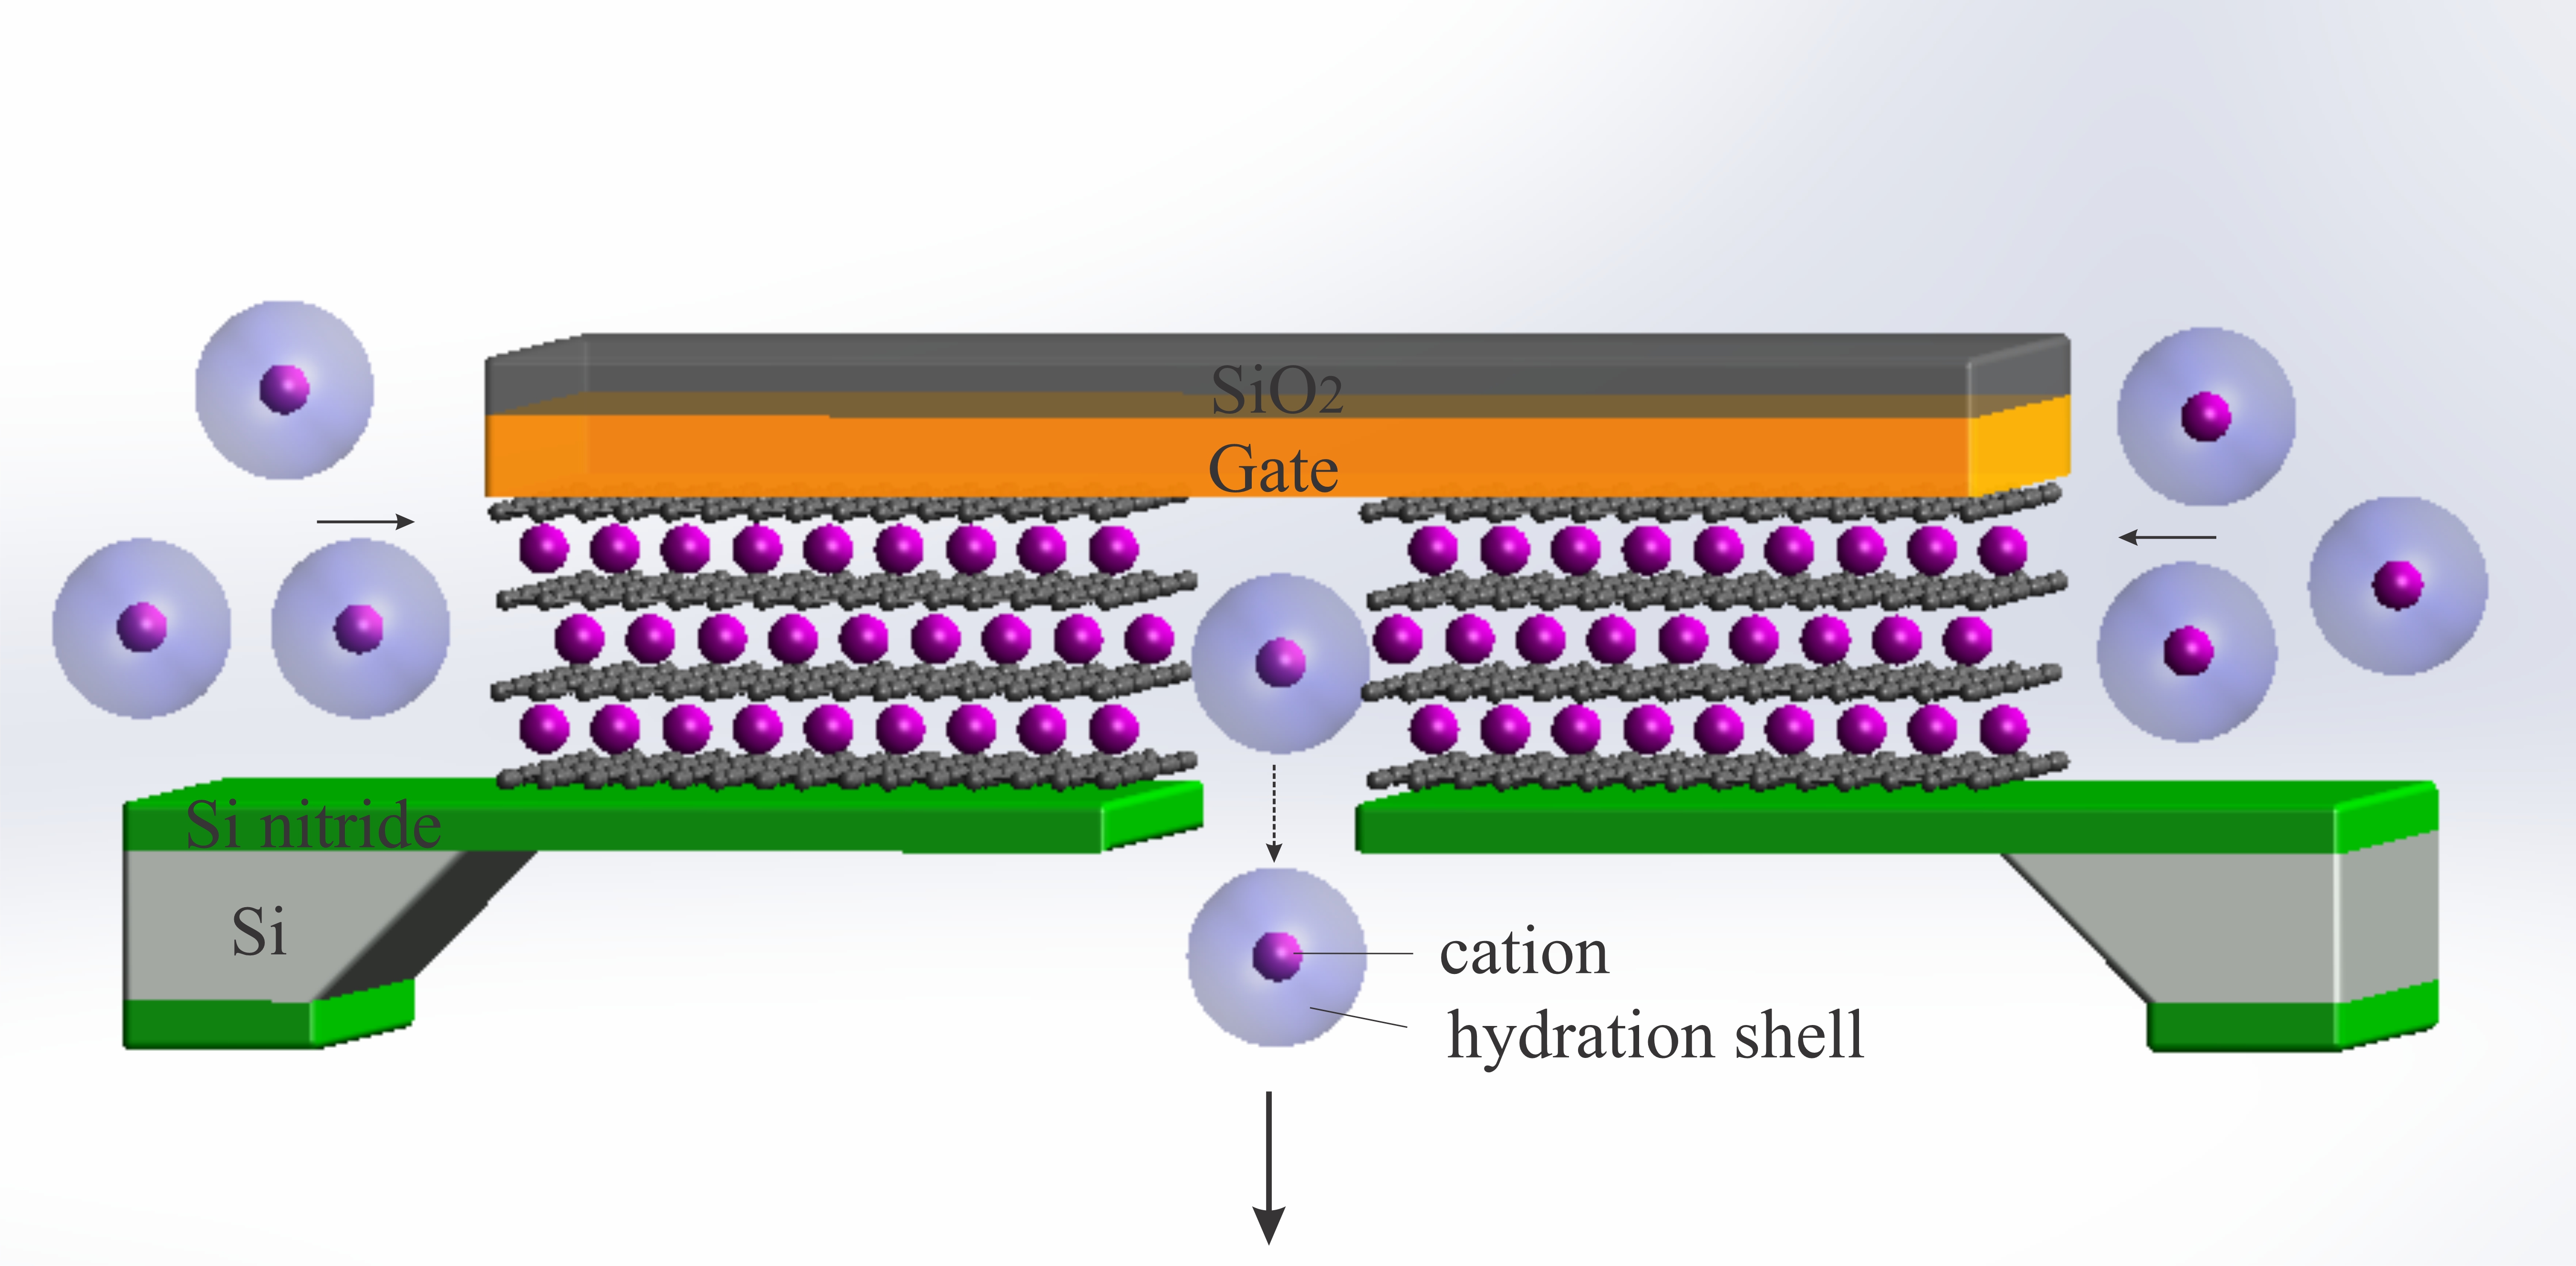 Scaling down Ionic Transistors to the ultimate limit - Schematic of the atomic-scale ion transistor made of graphene channels of 3 angstrom size. The electric potential is applied to mimic the electric charge on the walls of biological channels and enables ion intercalation and permeable ion transport beyond a percolation threshold. (Credit: Yahui Xue)